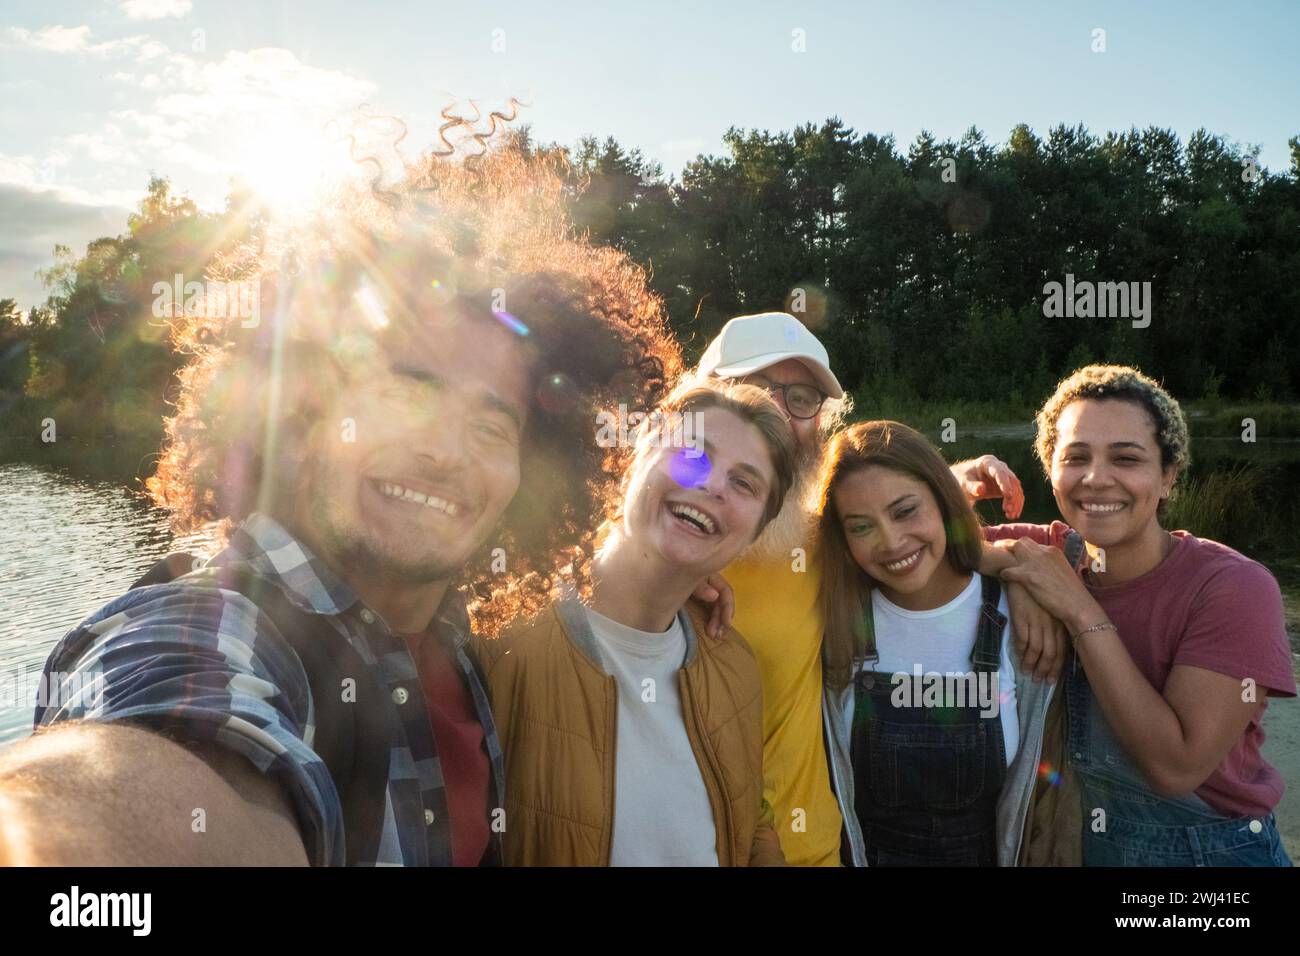 Sunshine Selfie: A Group's Moment of Joy by the Lake Stock Photo